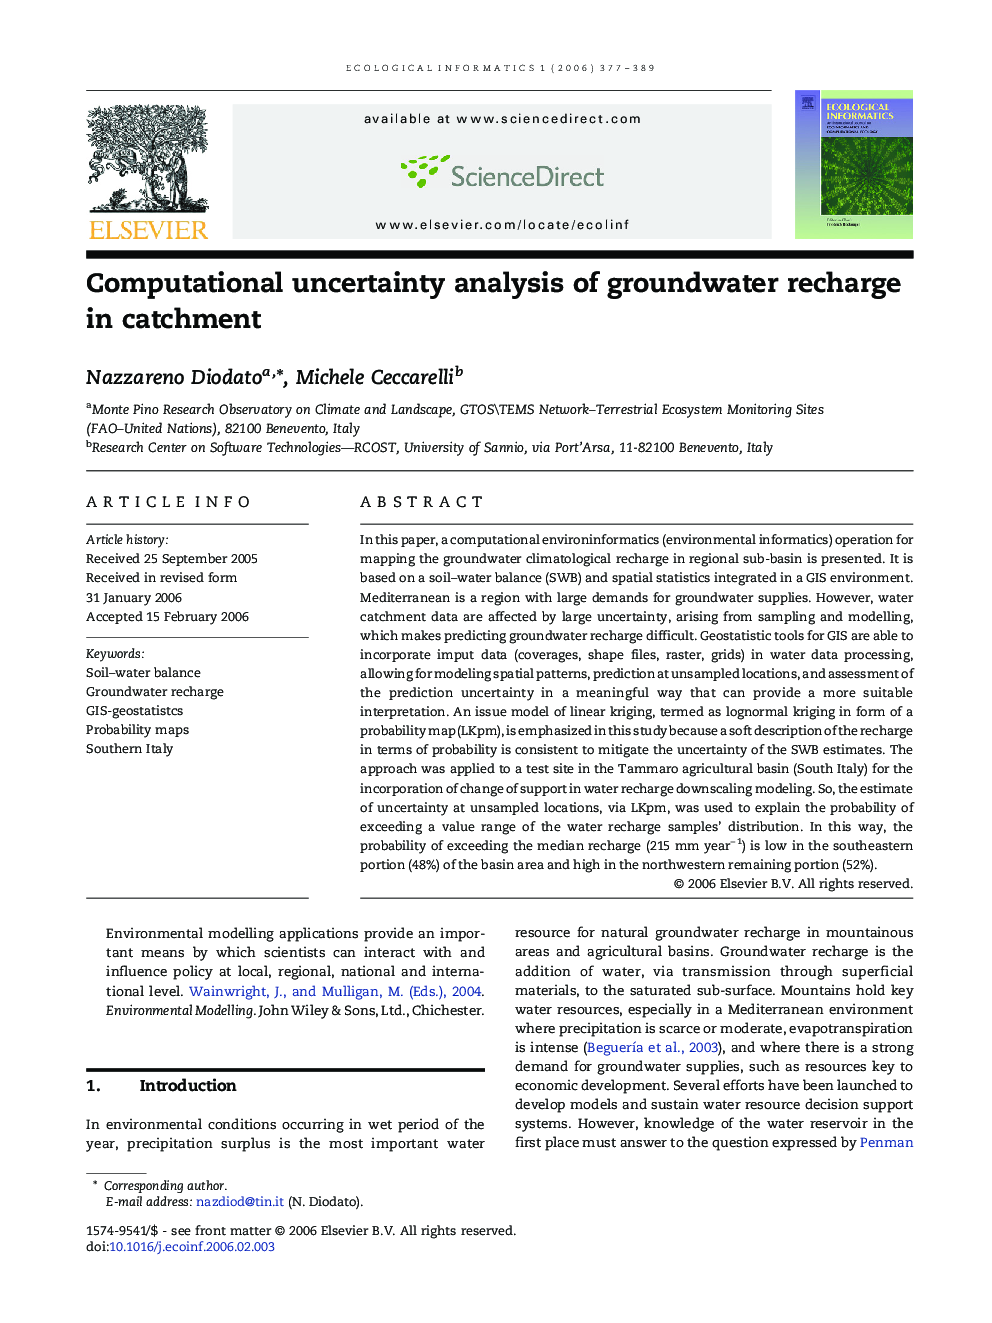 Computational uncertainty analysis of groundwater recharge in catchment